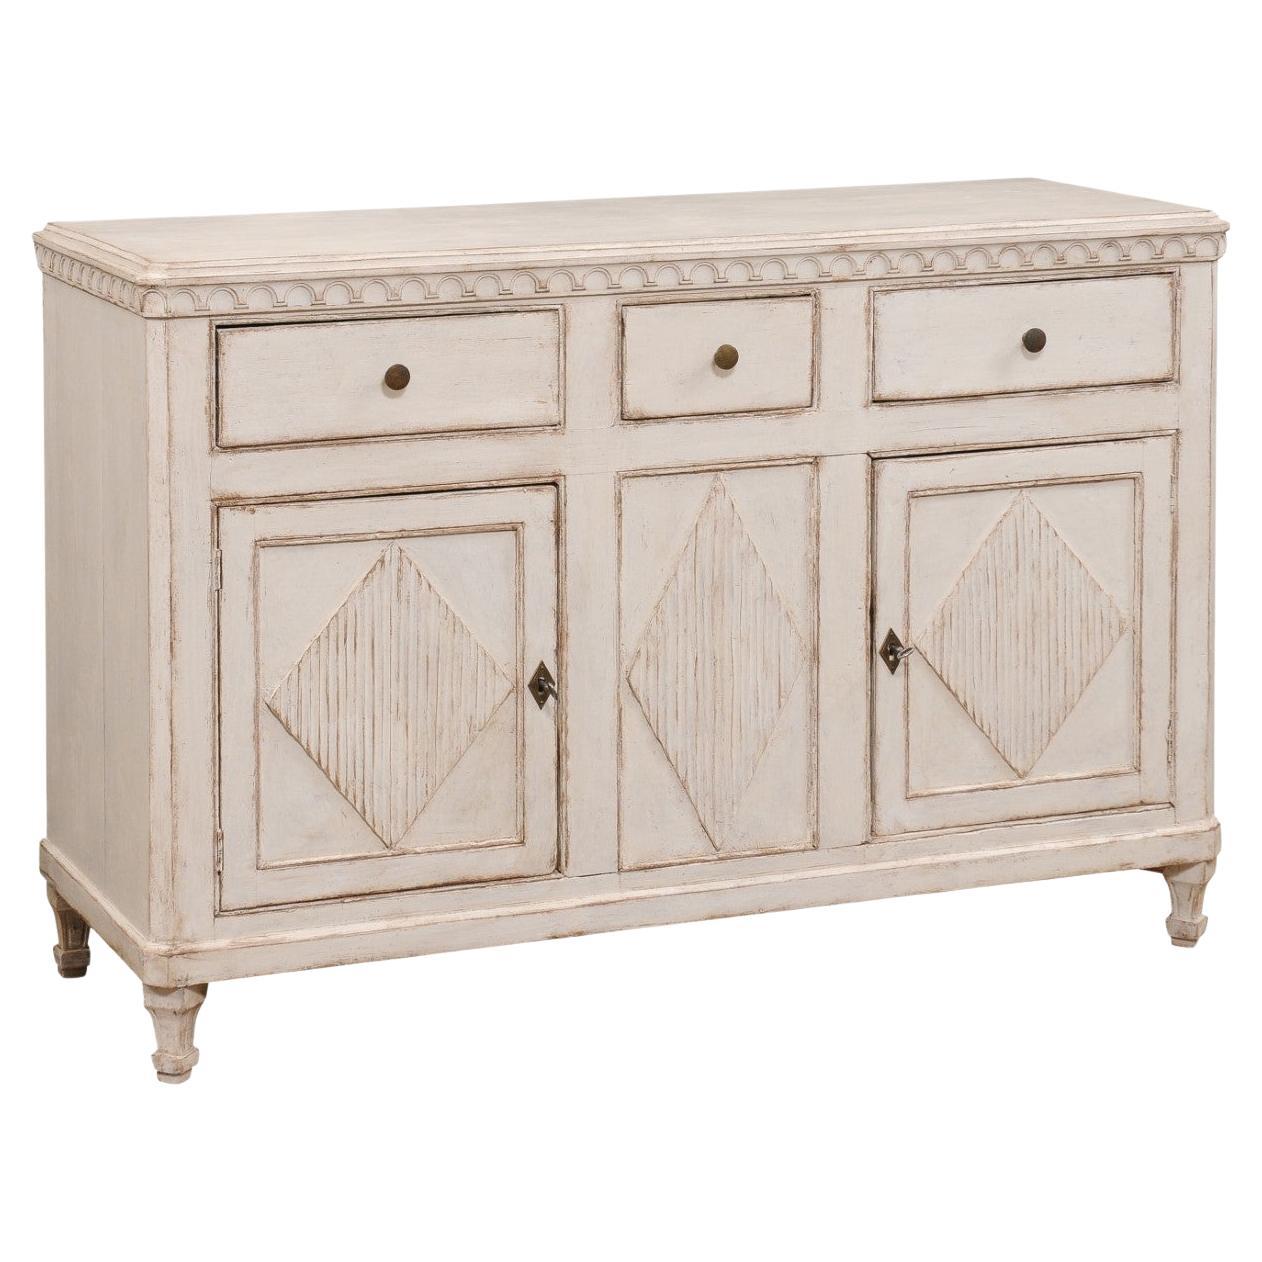 Swedish Gustavian Style 19th Century Painted Sideboard with Carved Motifs